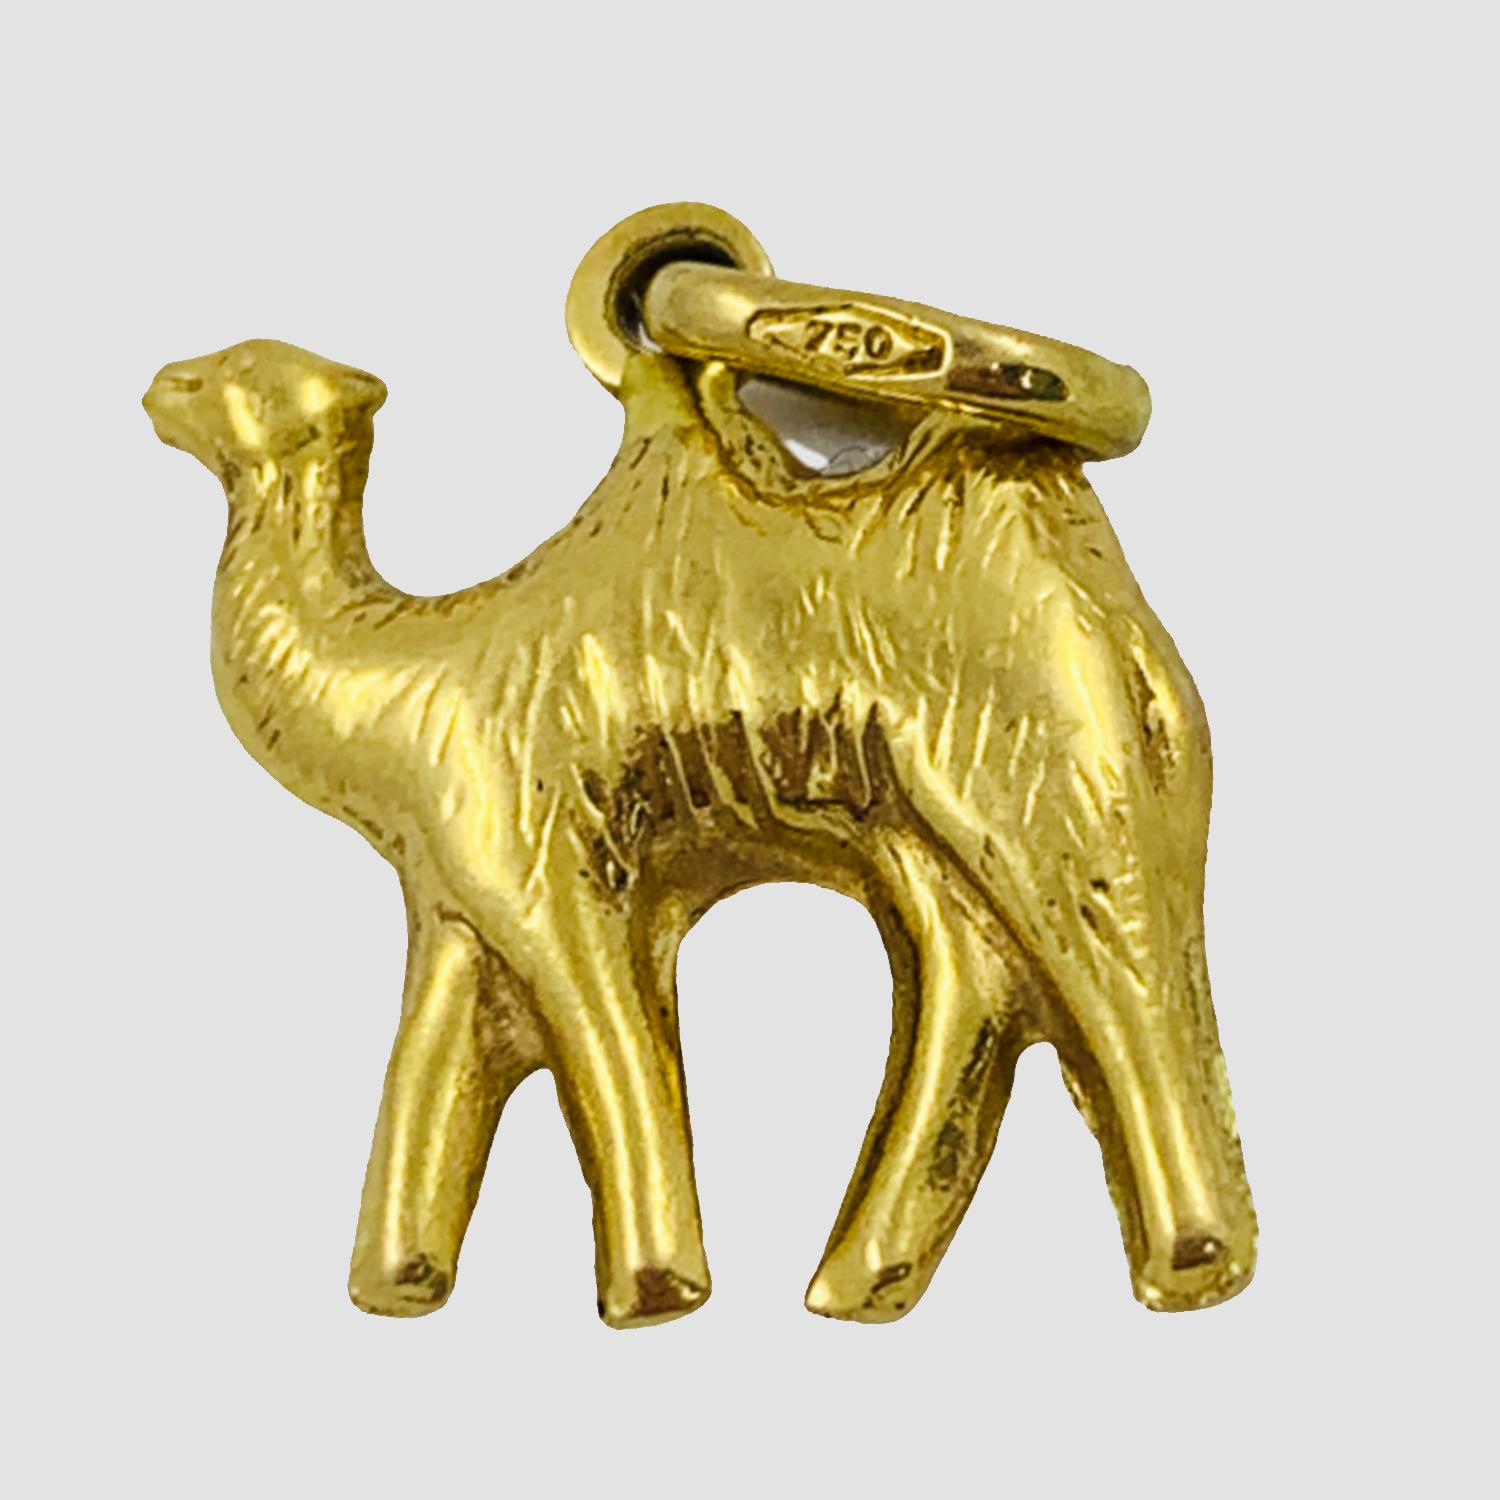 Vintage Golden Camel Charm circa 1930-40's

Crafted of 18K yellow gold, this little camel would make such a cute addition to any charm bracelet or necklace. The charm features a dromedary camel with a jump ring to easily add to your charm bracelet